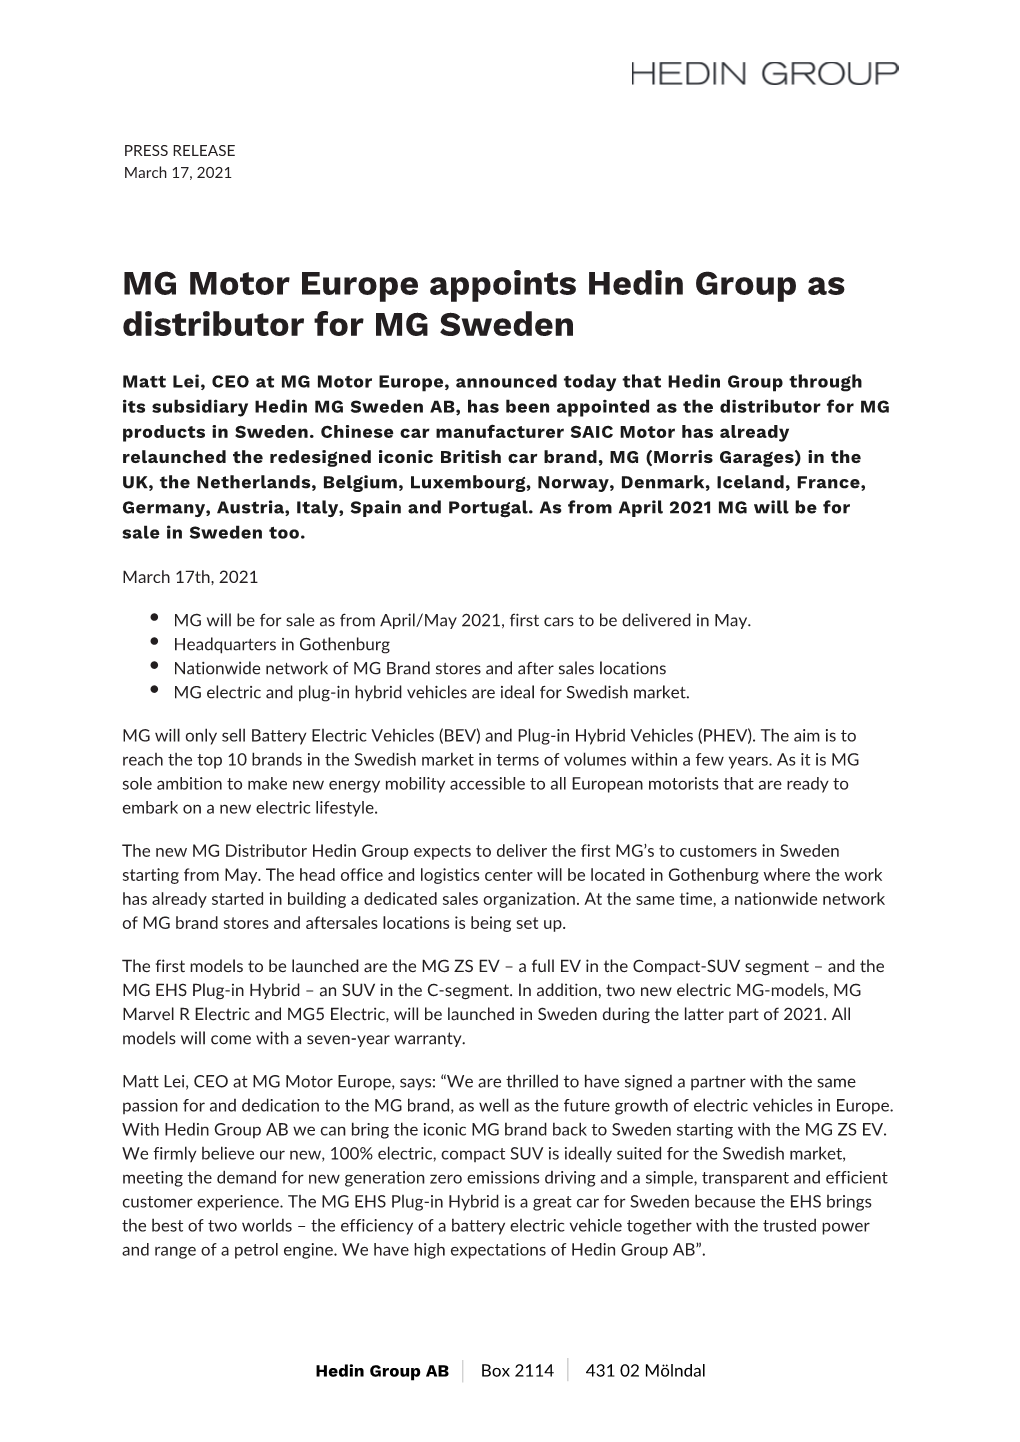 MG Motor Europe Appoints Hedin Group As Distributor for MG Sweden